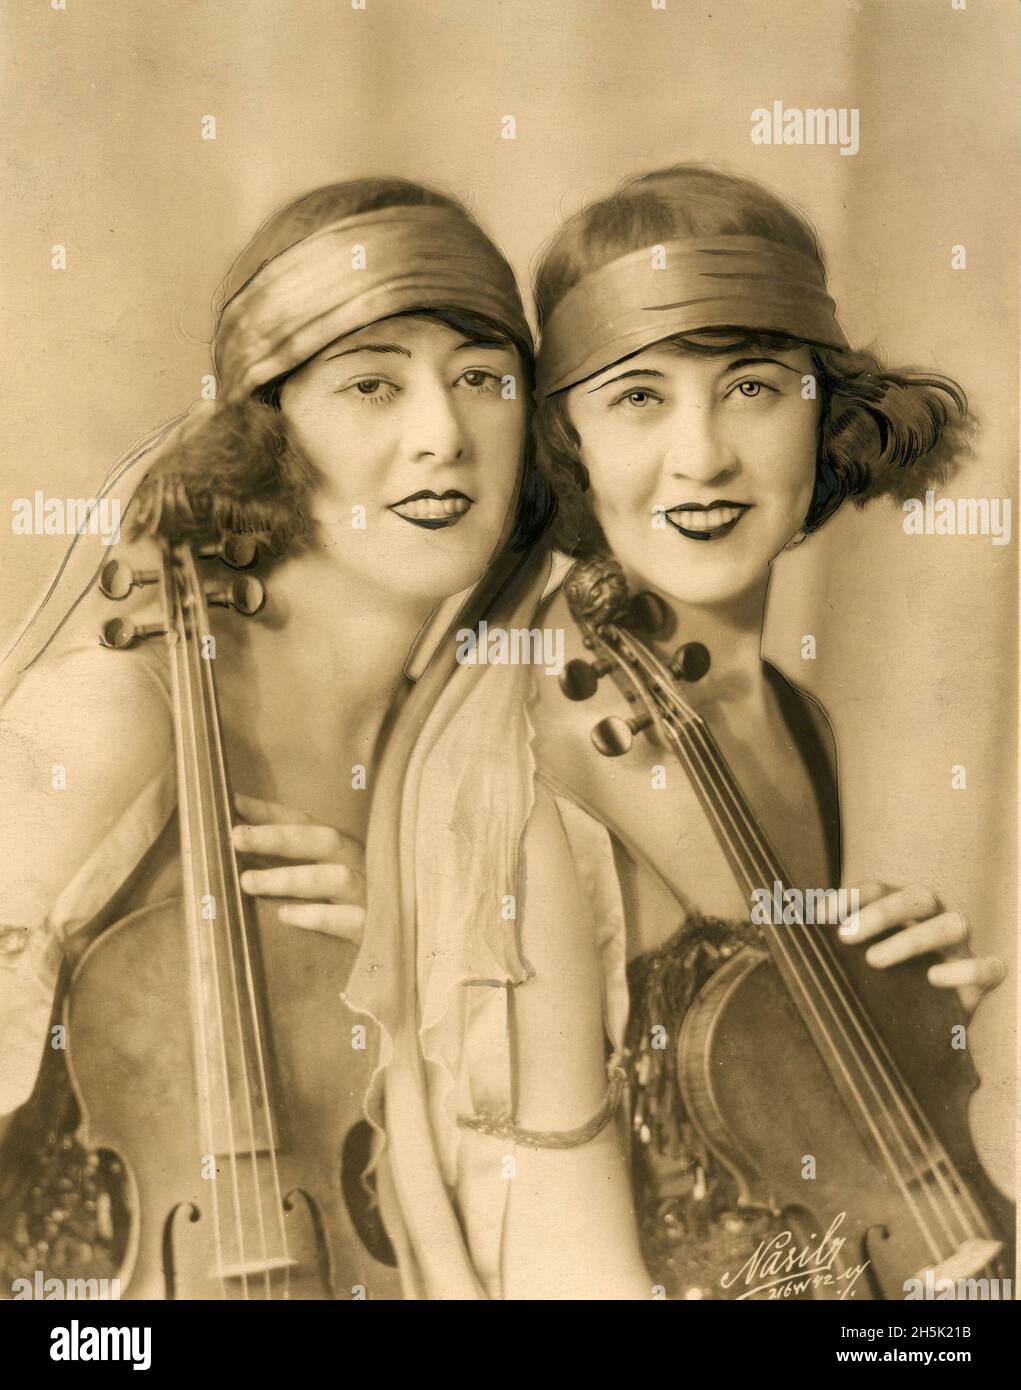 The Beasley Twins - Vaudeville Performers Banque D'Images